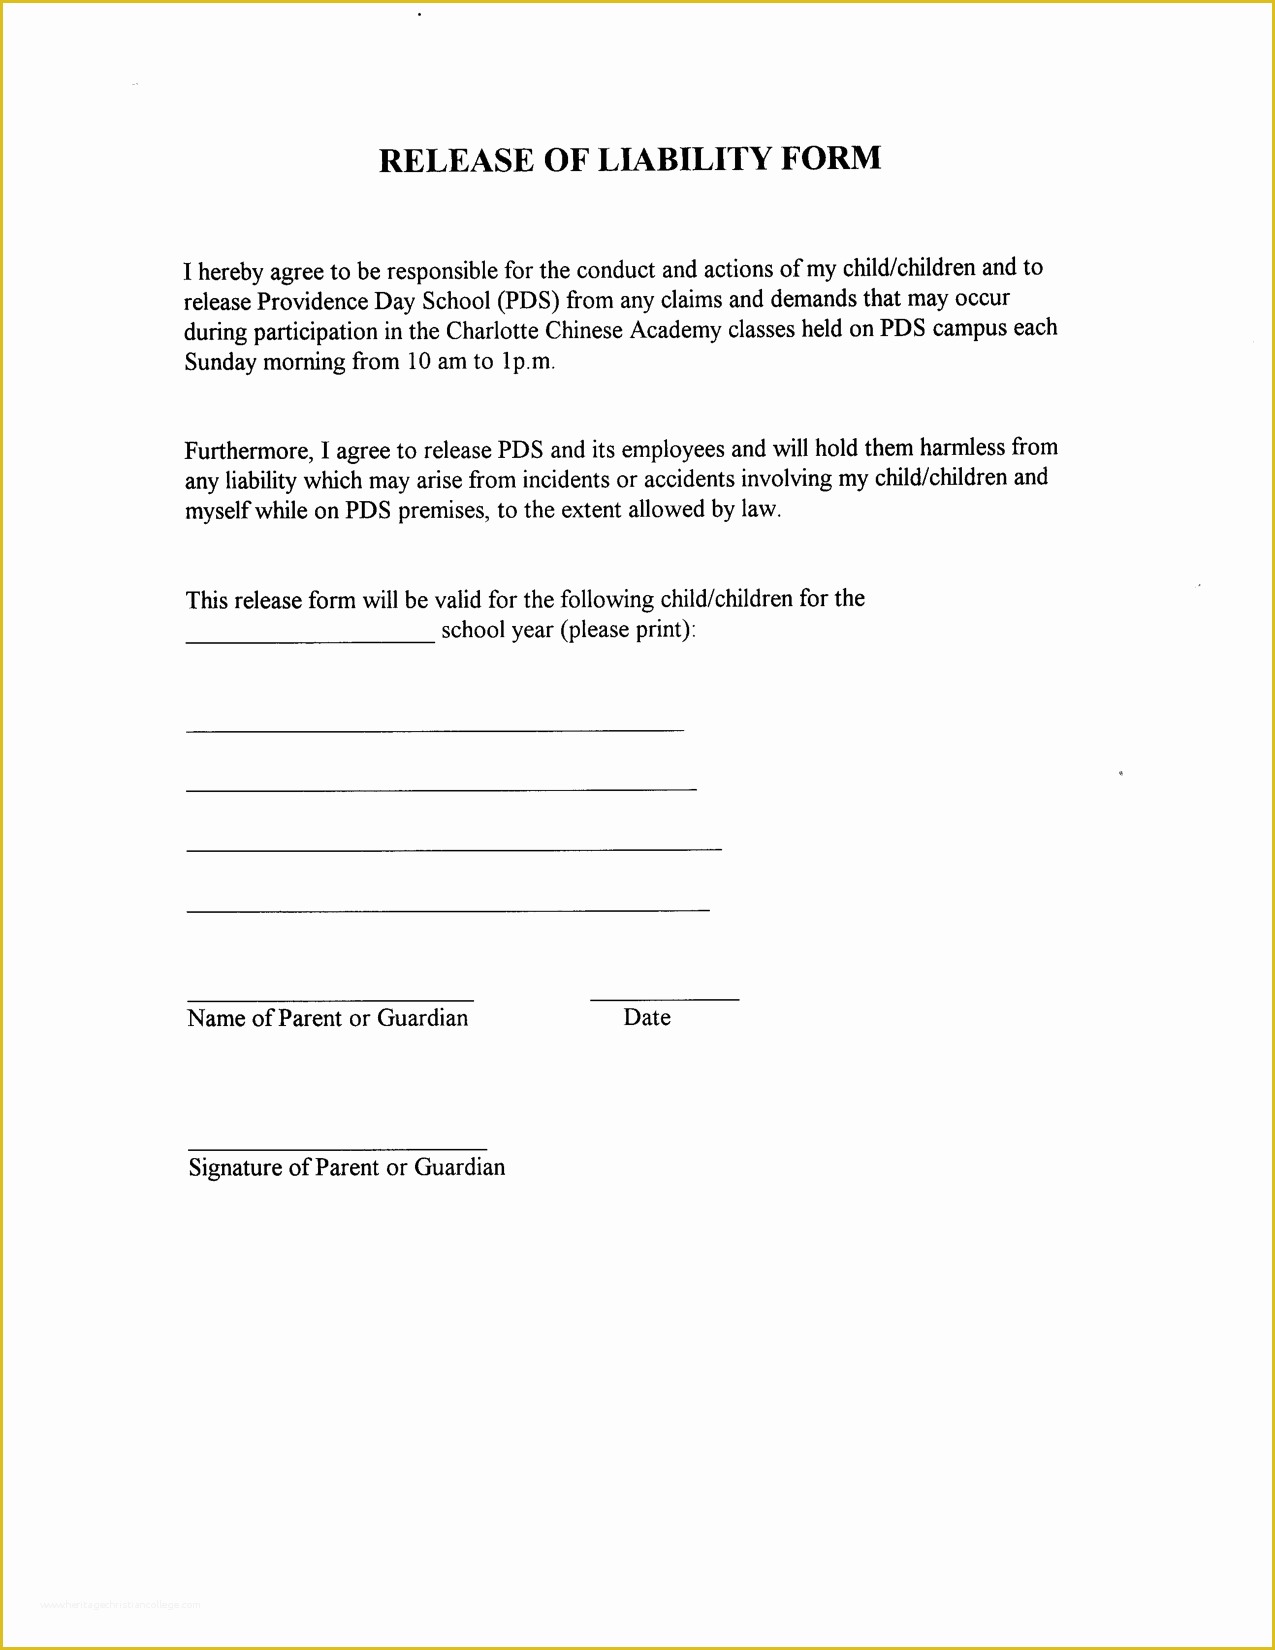 free-liability-release-form-template-of-liability-release-form-template-in-images-release-of